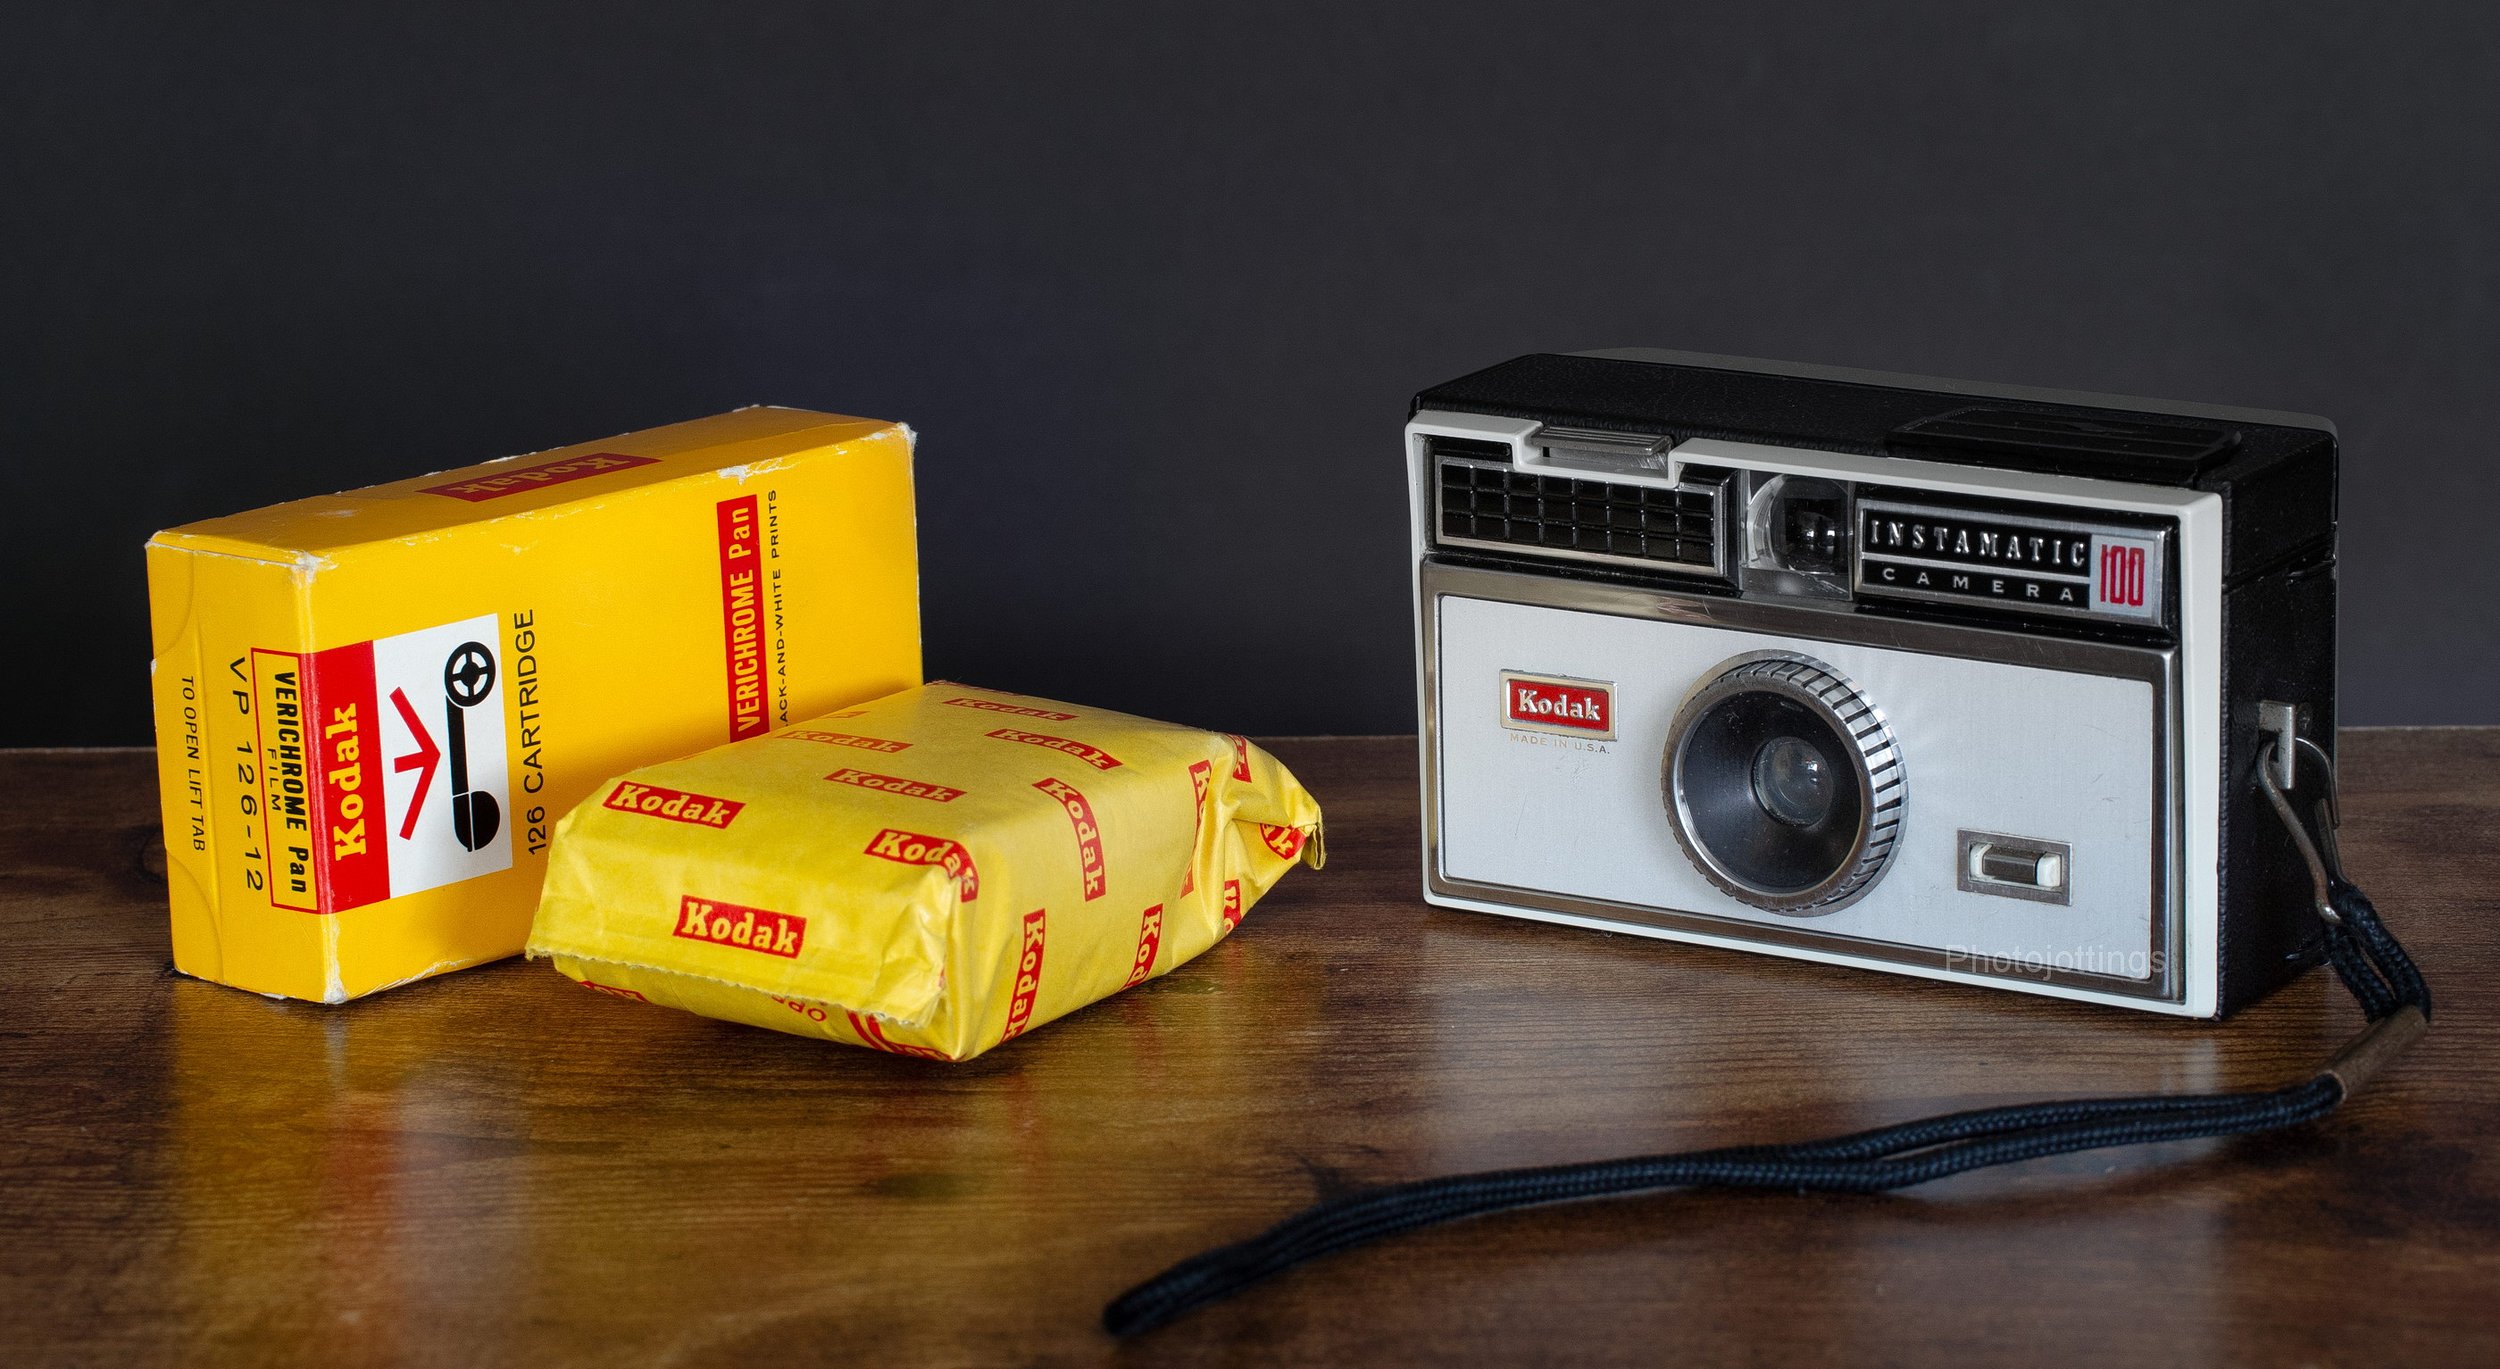 History of Kodak: You press the button we do the rest — about photography  blog